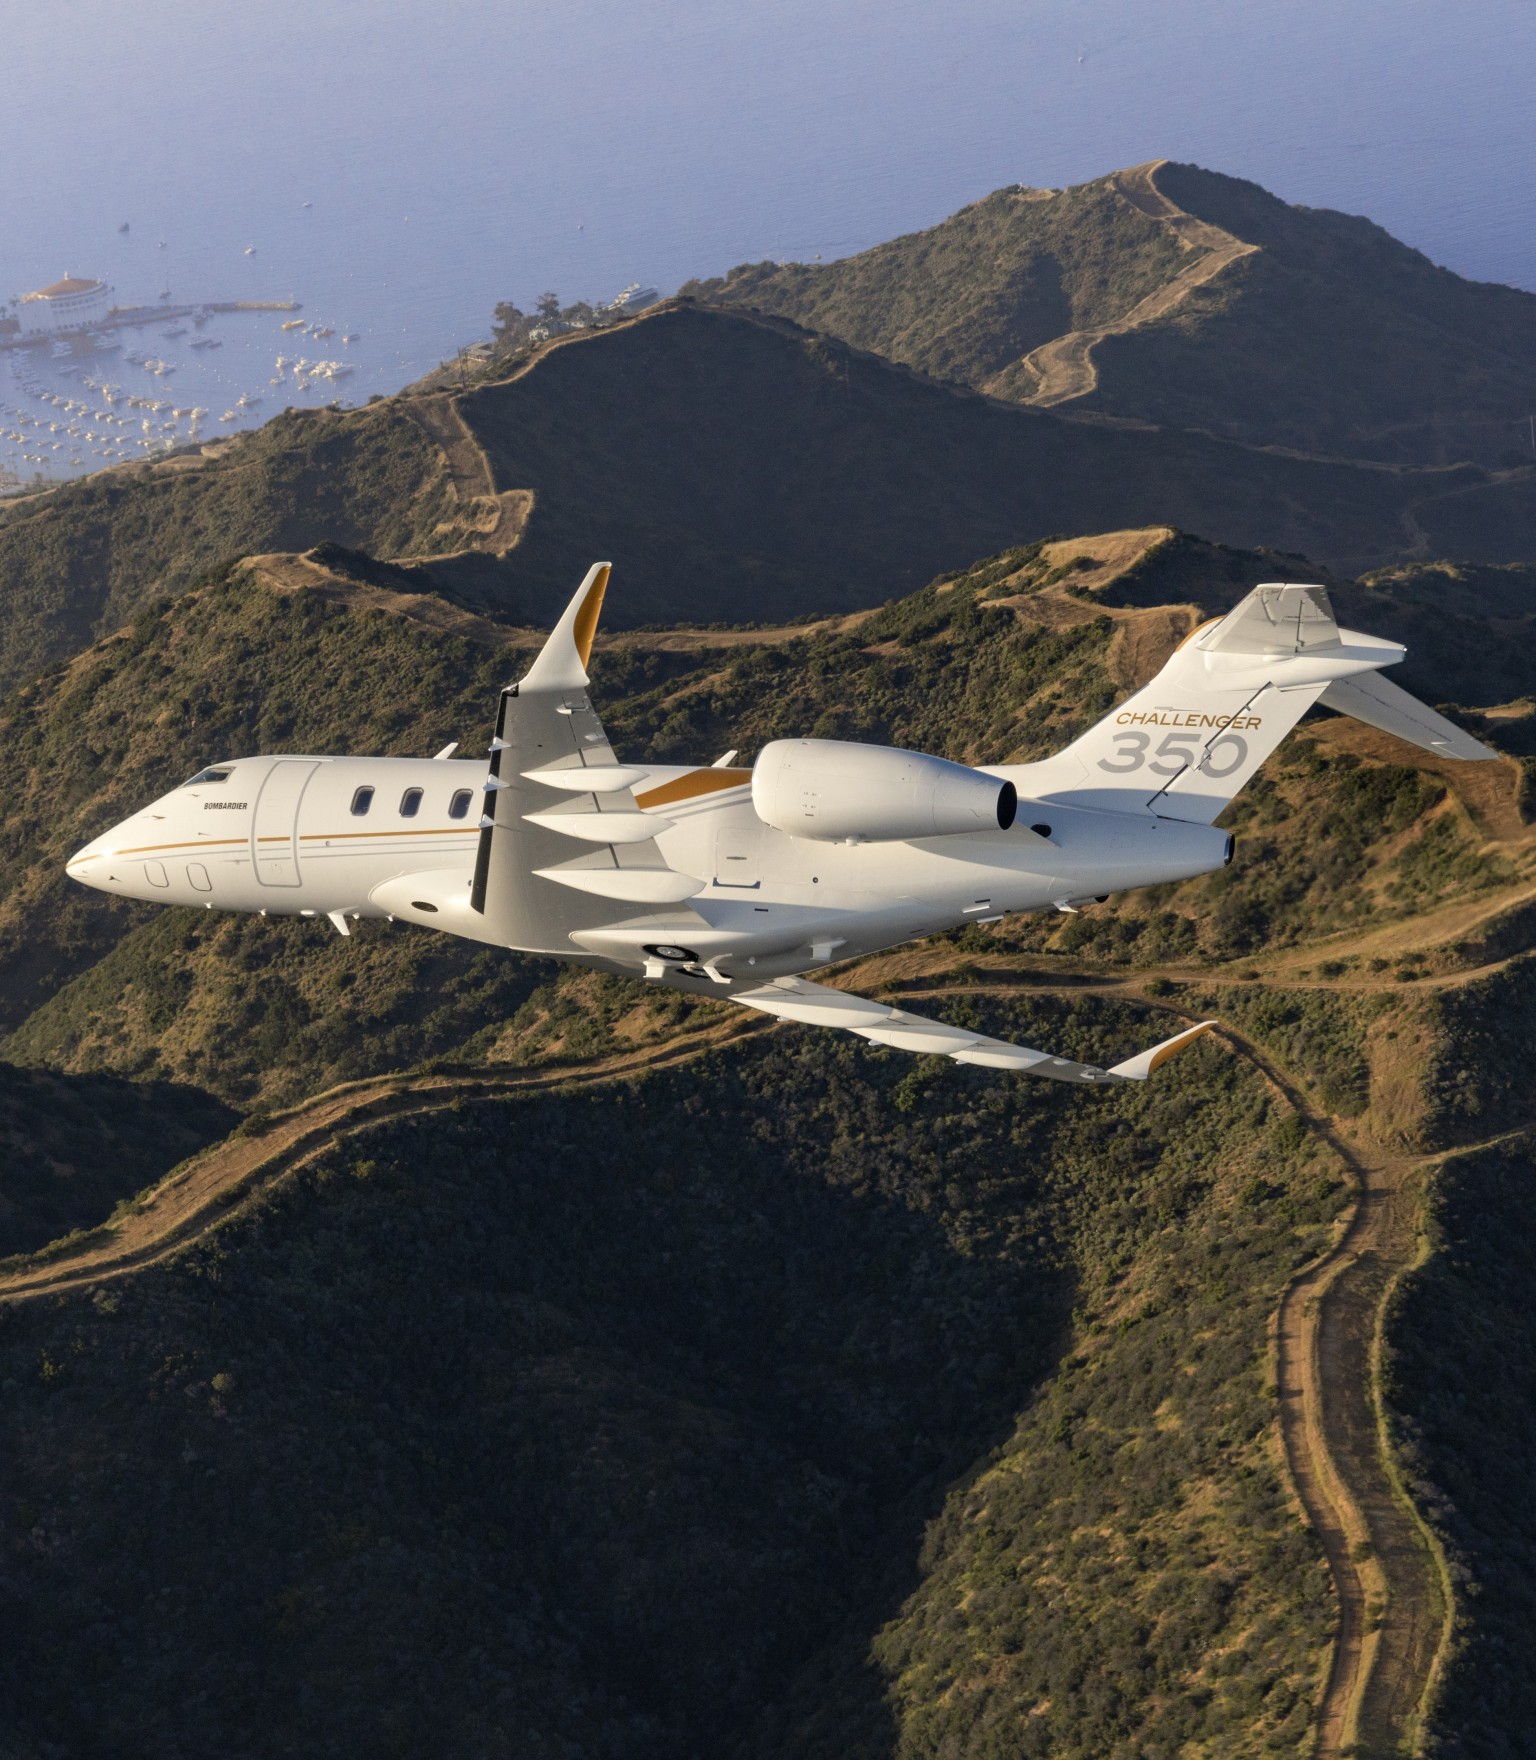 Challenger 350 over Mountains